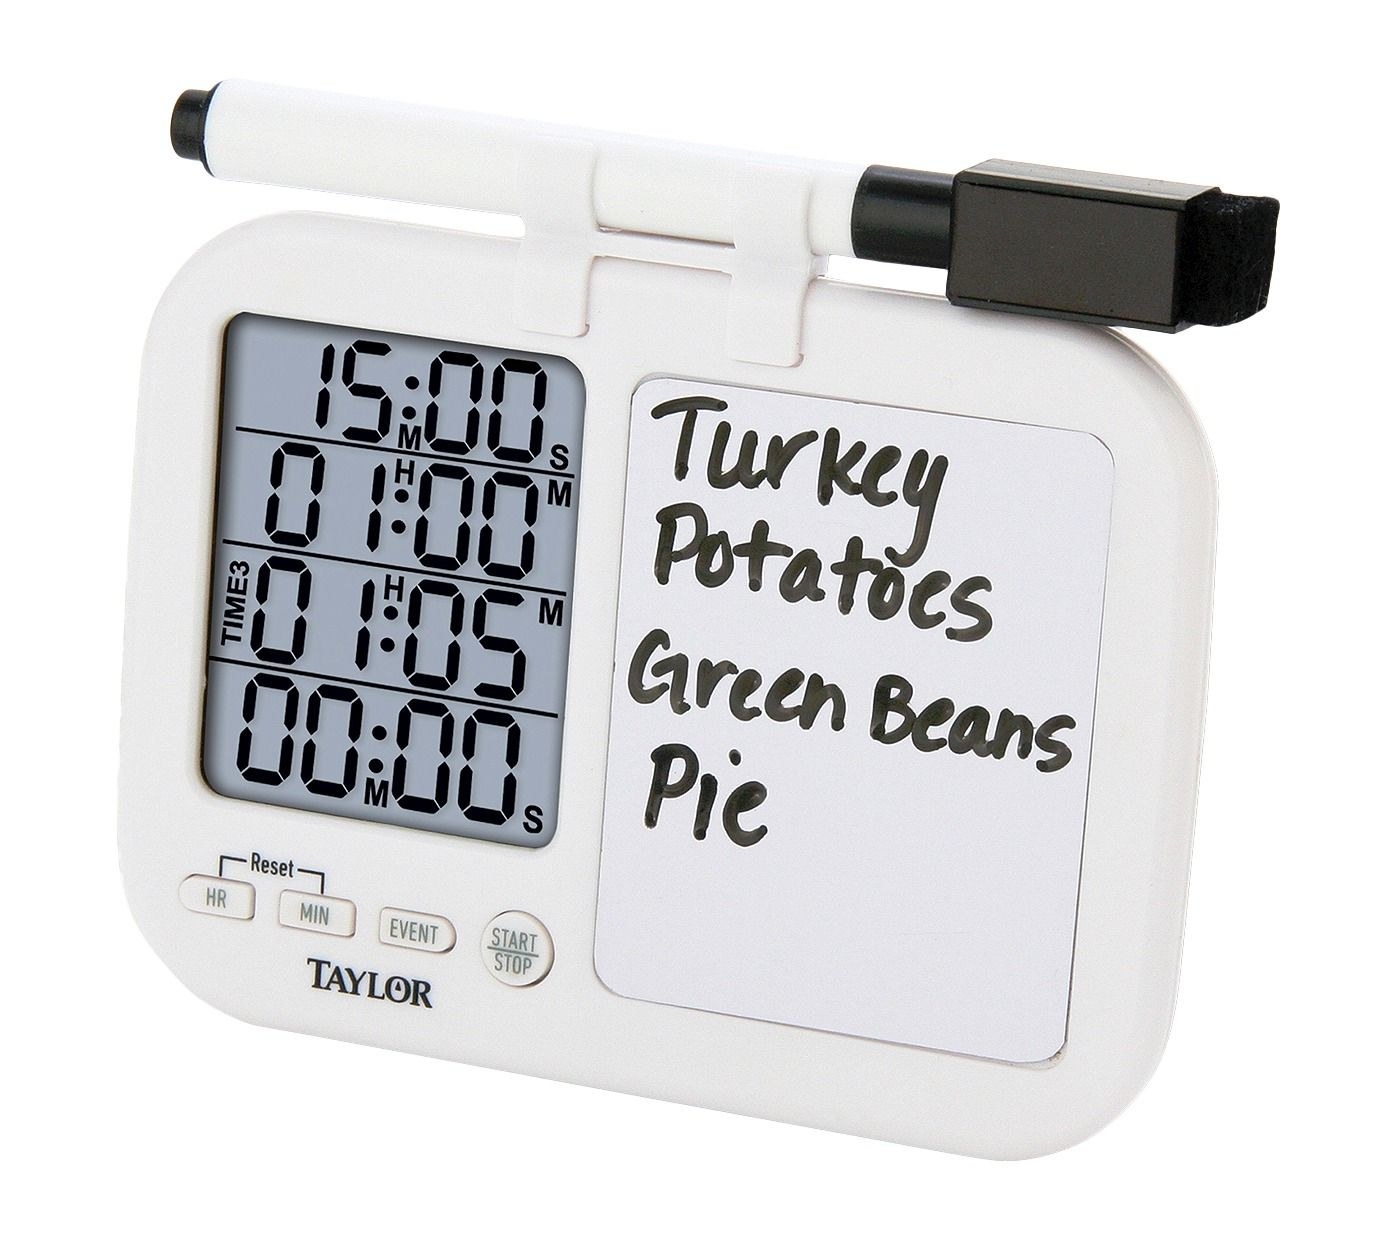 The small rectangular timer, with a digital screen with four countdown clocks, as well as a small whiteboard and dry-erase pen holder